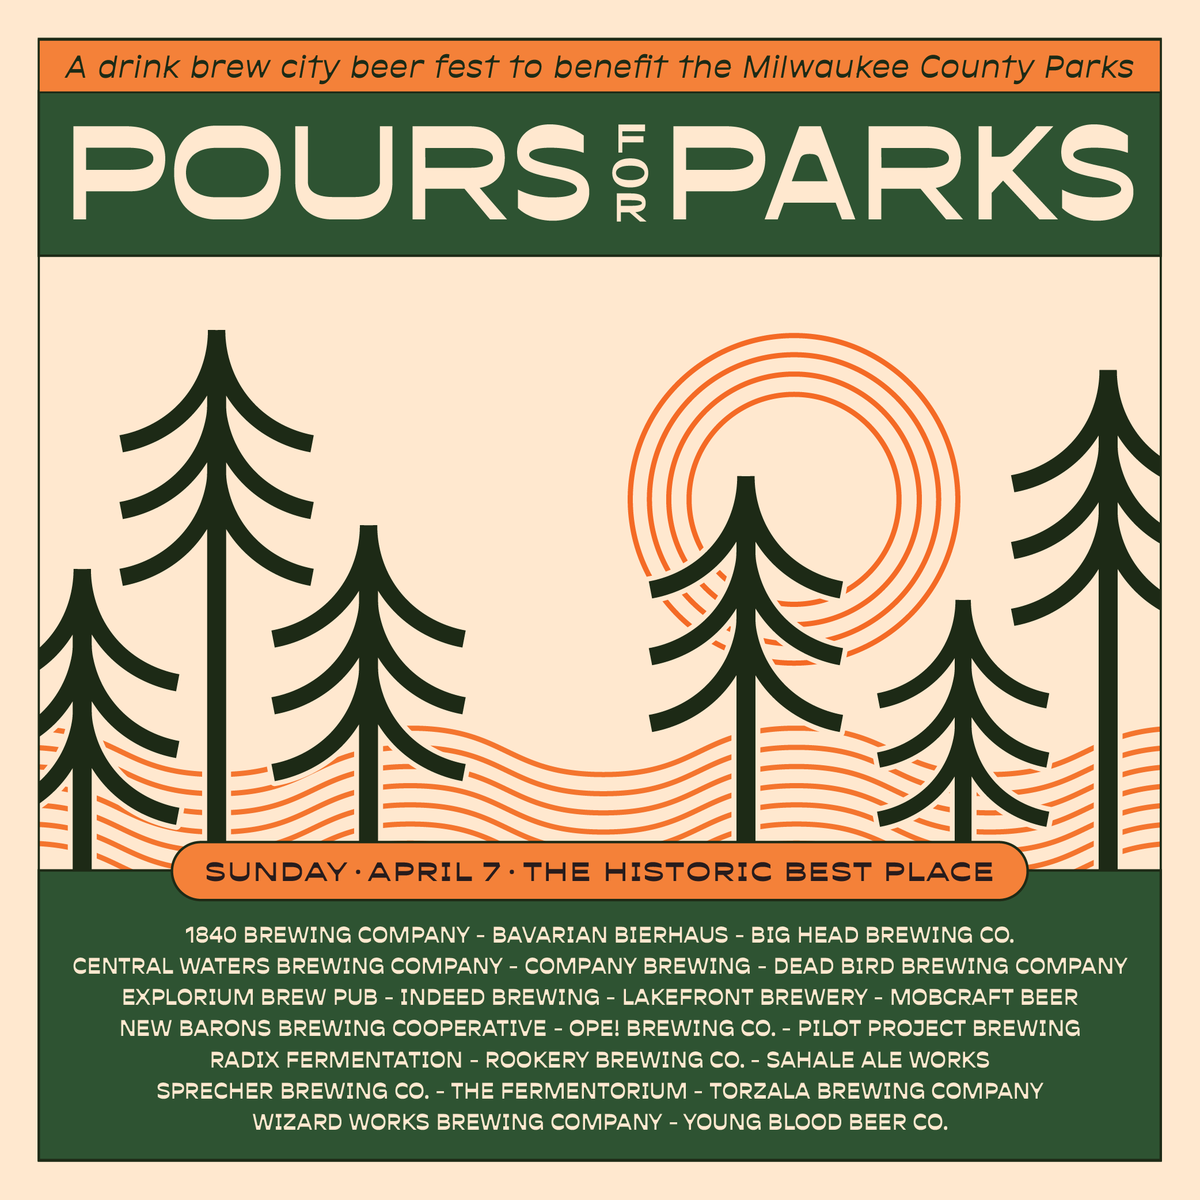 Pours for Parks is a brand-new beer fest featuring over 20 Milwaukee area breweries and benefiting Milwaukee @CountyParks! The fest is Sunday, April 7 at the @BestPlacePabst 🌿 Learn More → tinyurl.com/mspmfmpv